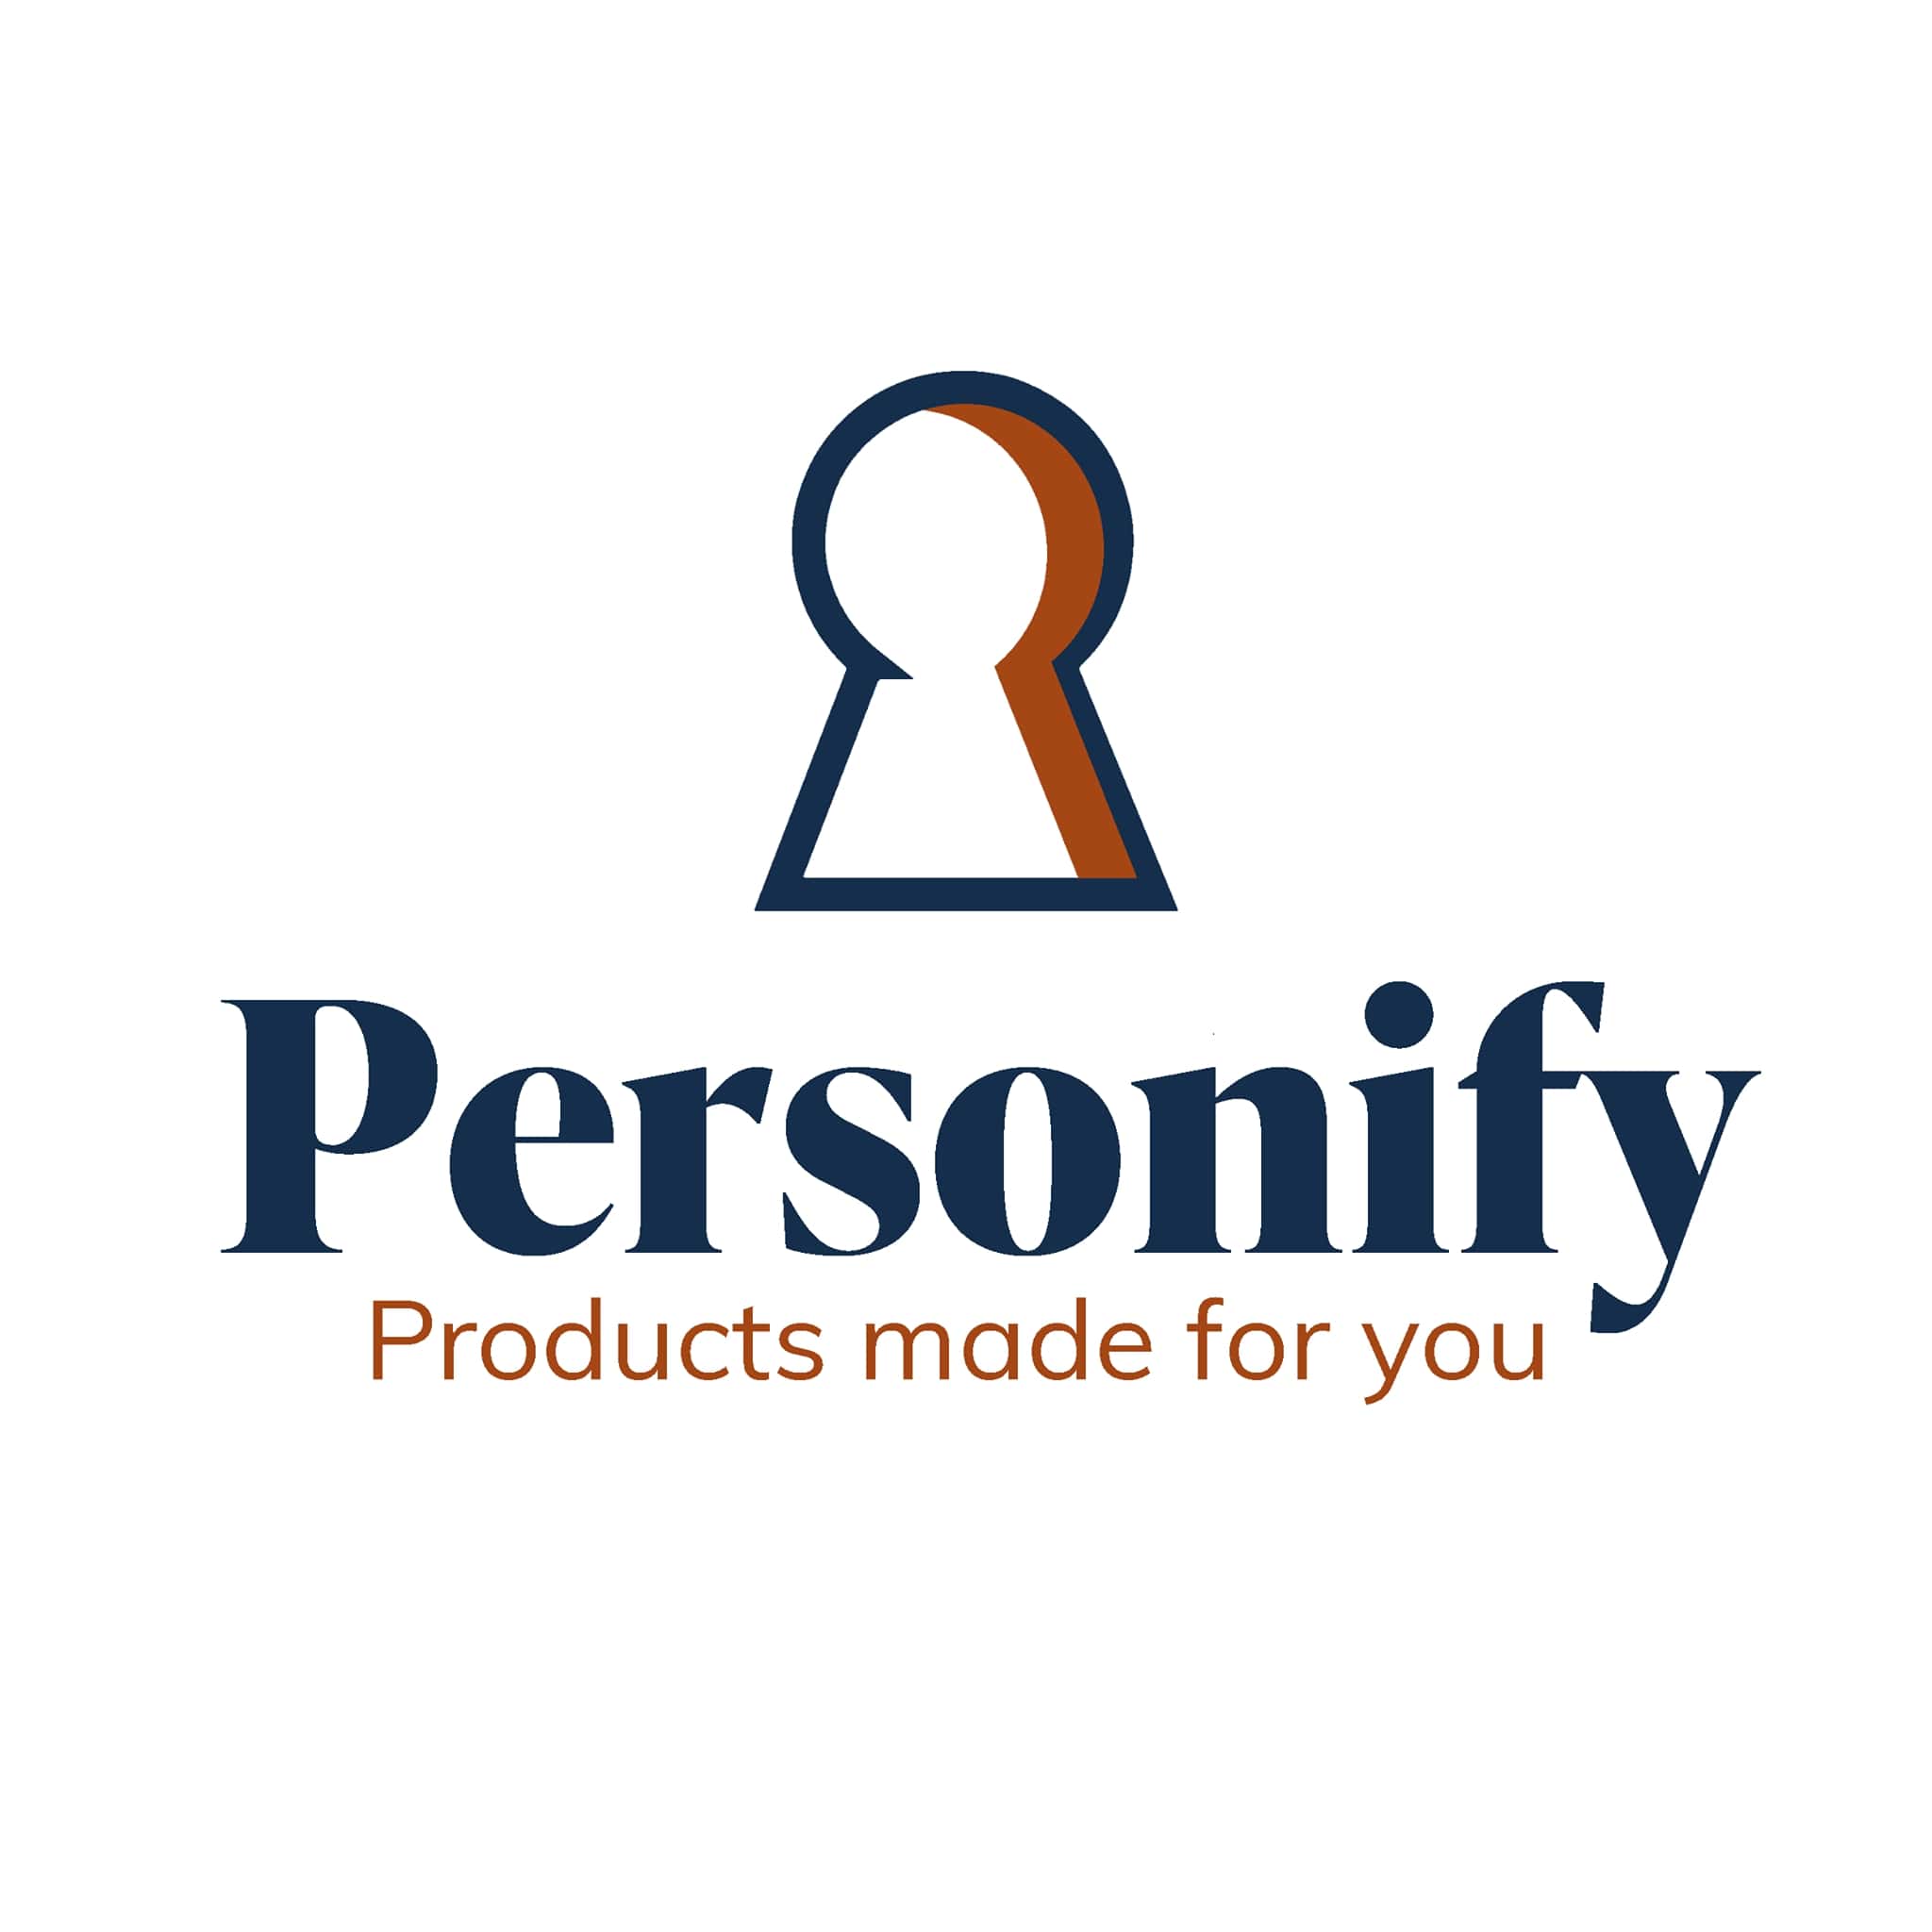 Business logo of Personify Limited